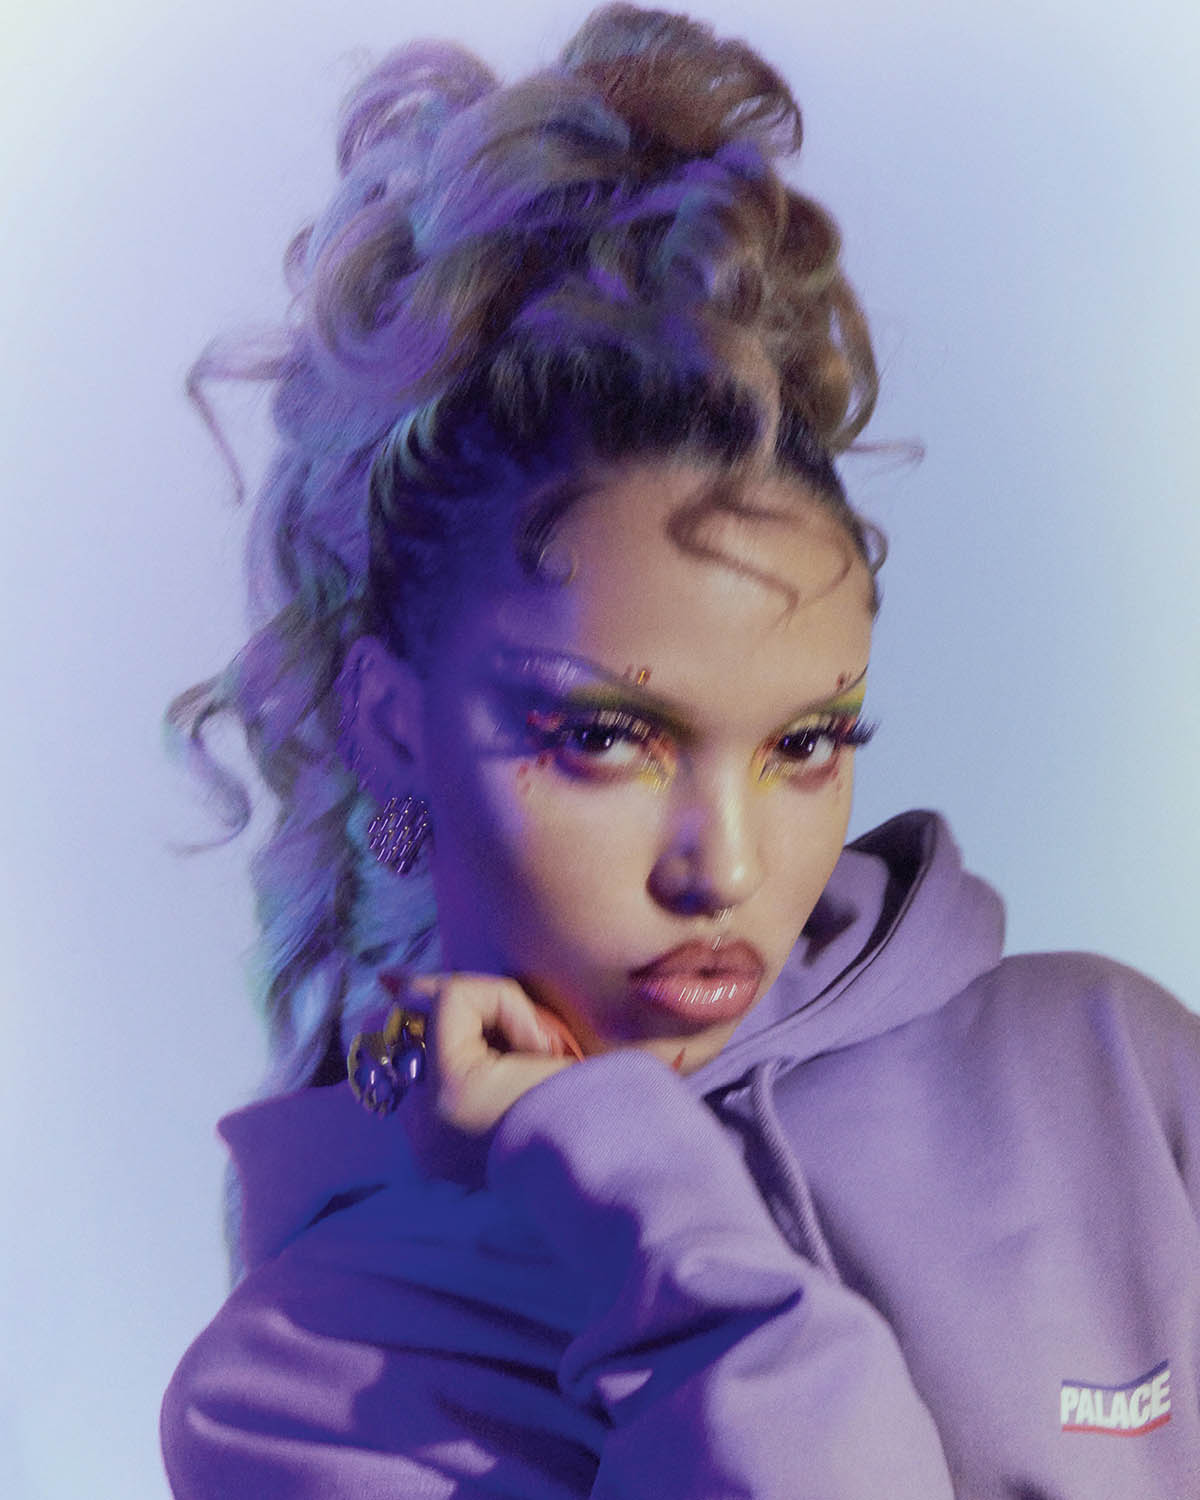 FKA Twigs covers The Face Magazine Spring 2021 by Charlotte Wales